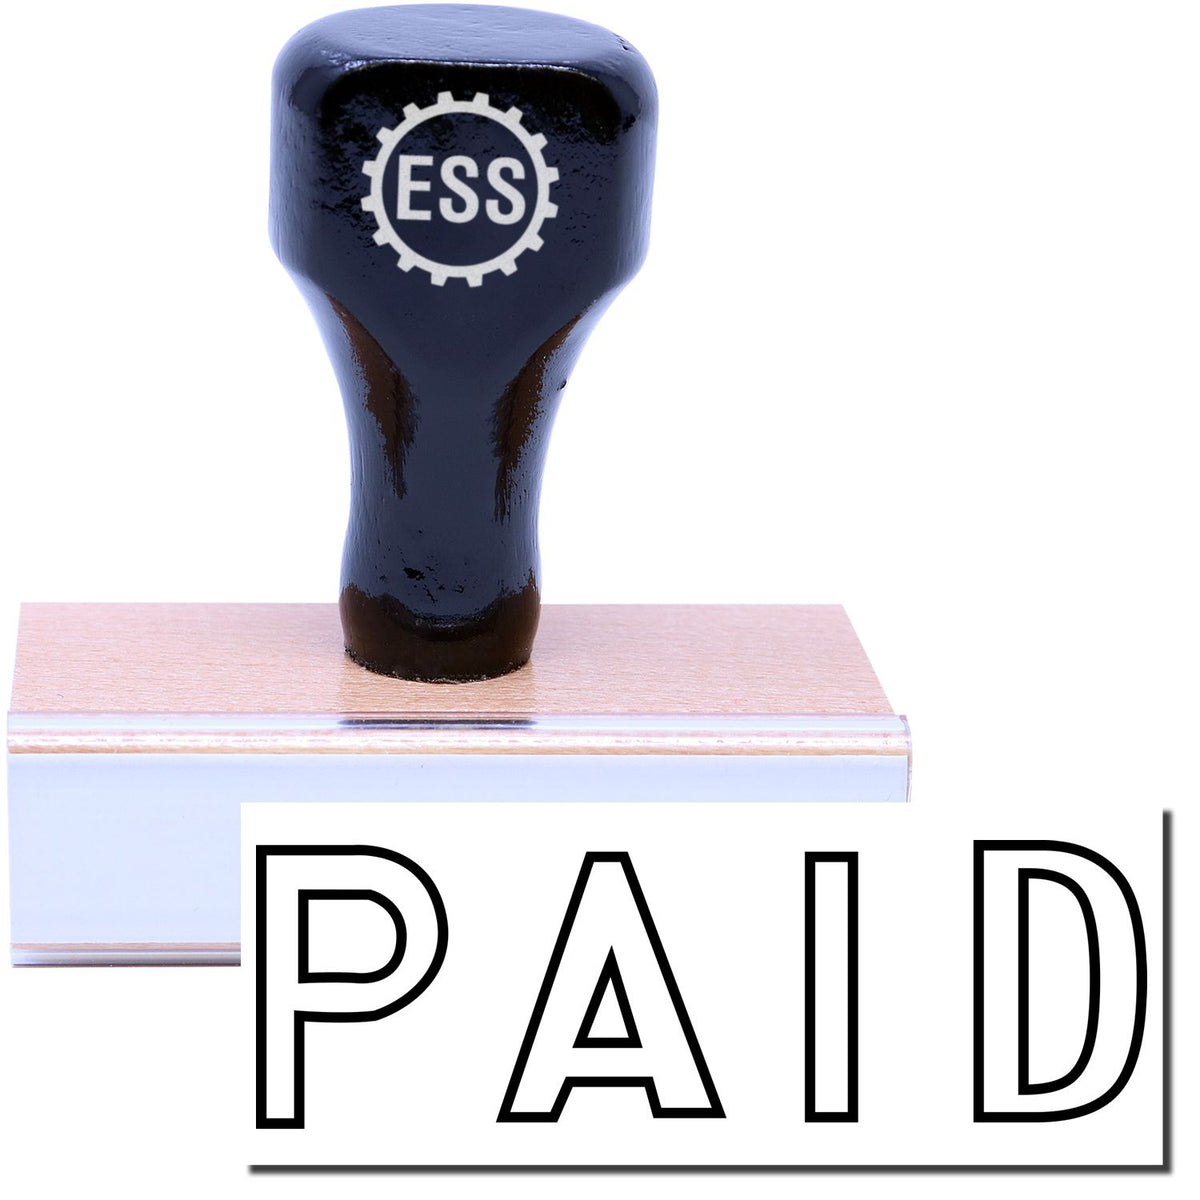 A stock office rubber stamp with a stamped image showing how the text &quot;PAID&quot; in an outline font is displayed after stamping.